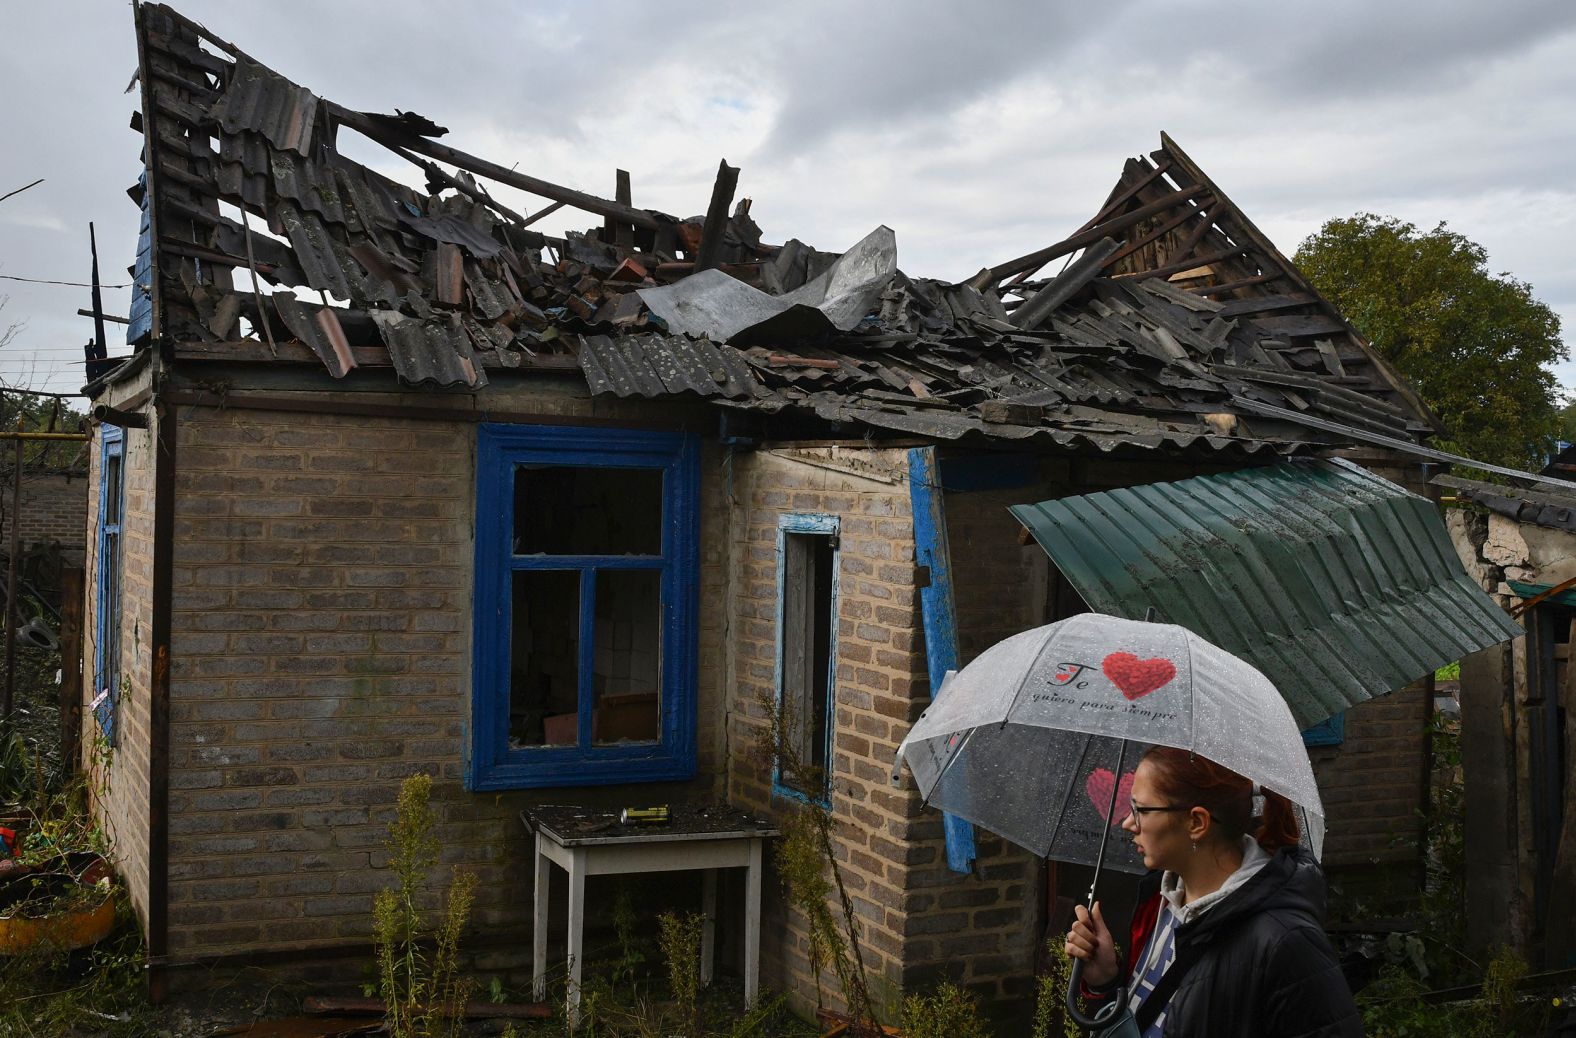 A woman stands next to a residential building that was damaged after an overnight Russian attack in Kramatorsk, Ukraine, on Tuesday, October 4.